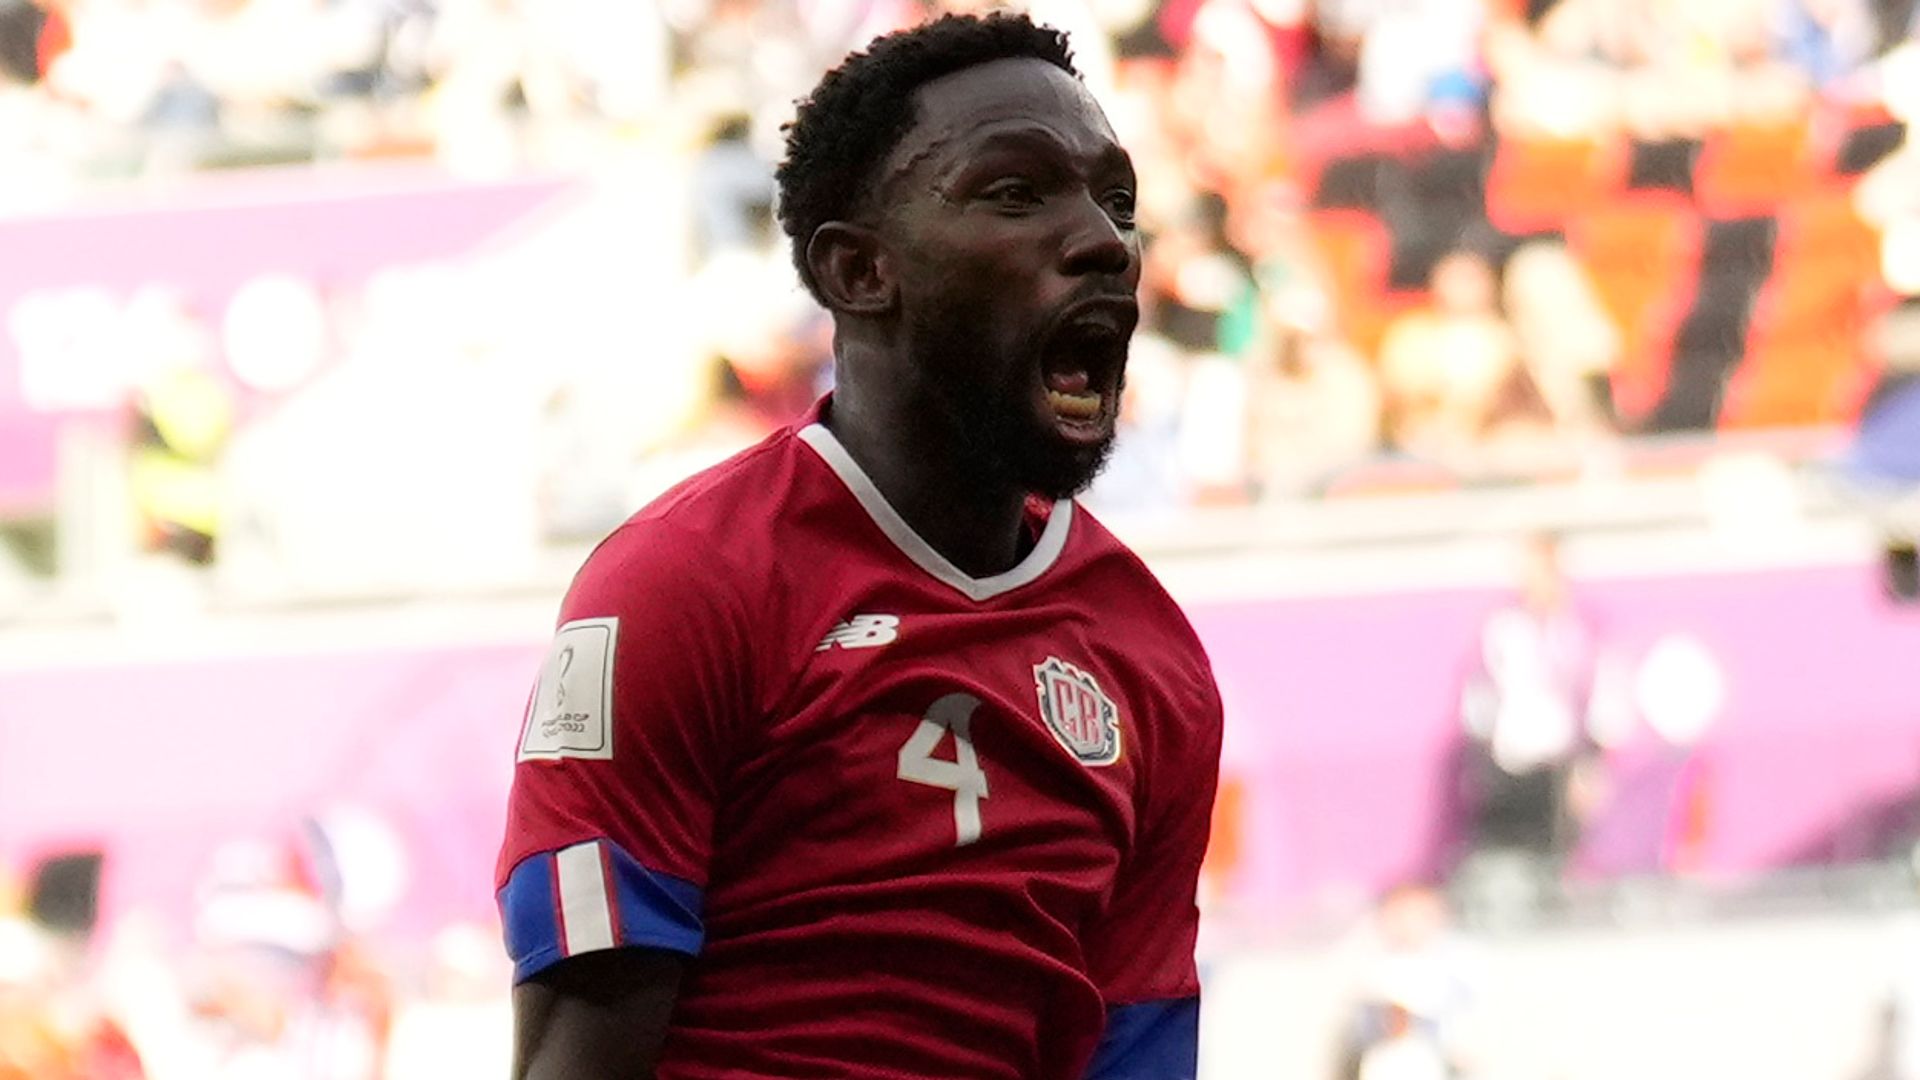 World Cup: Japan 0-1 Costa Rica commentary and reaction